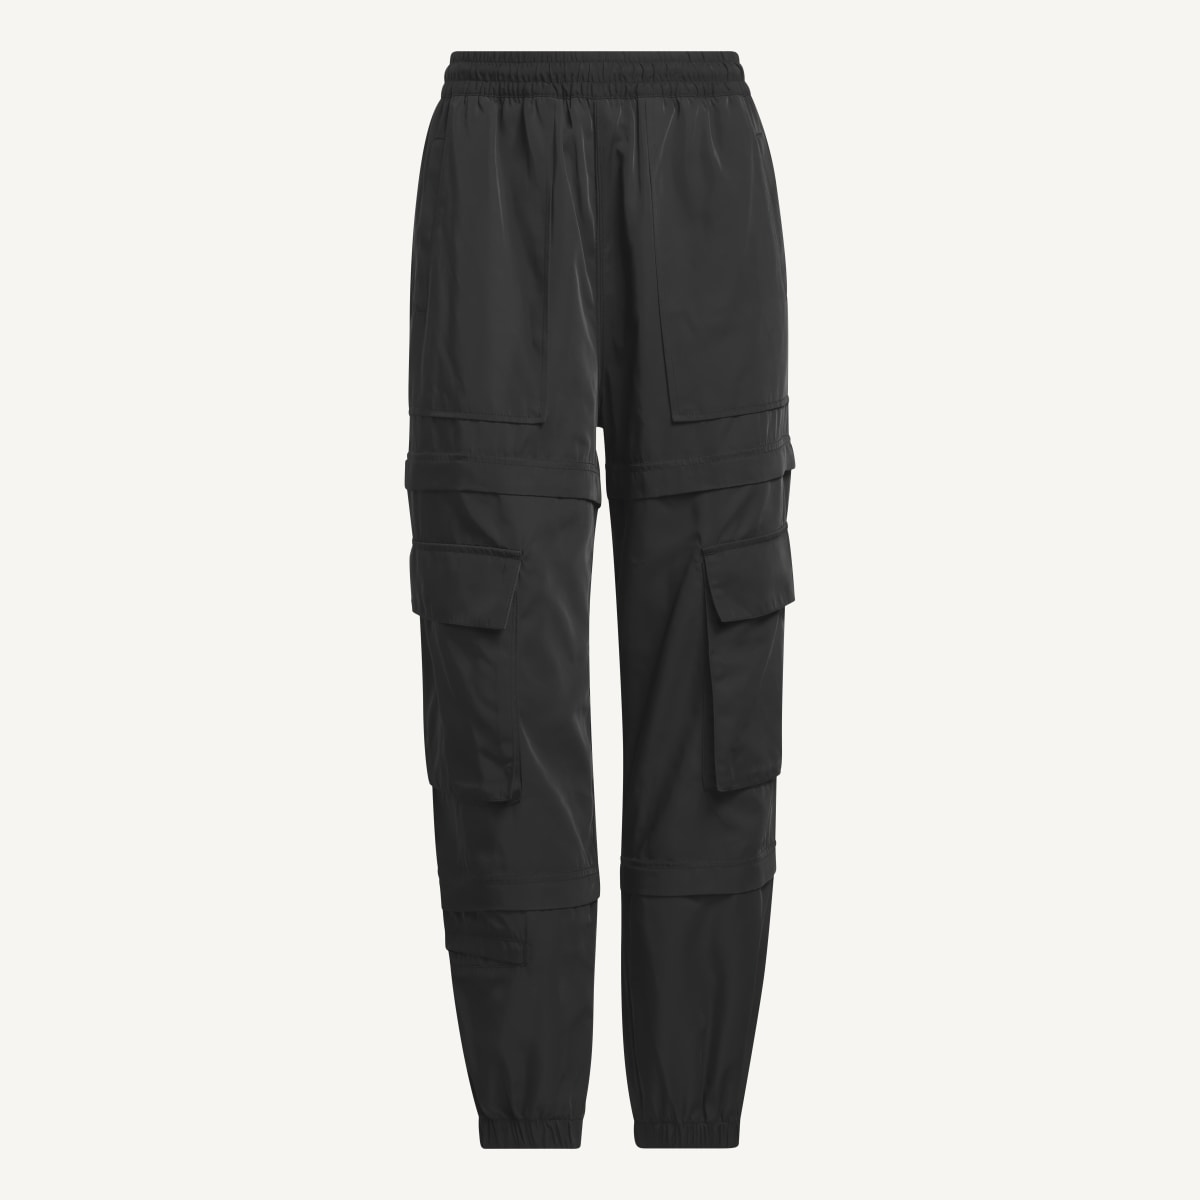 Adidas 3-in-1 Track Pants (All Gender). 5